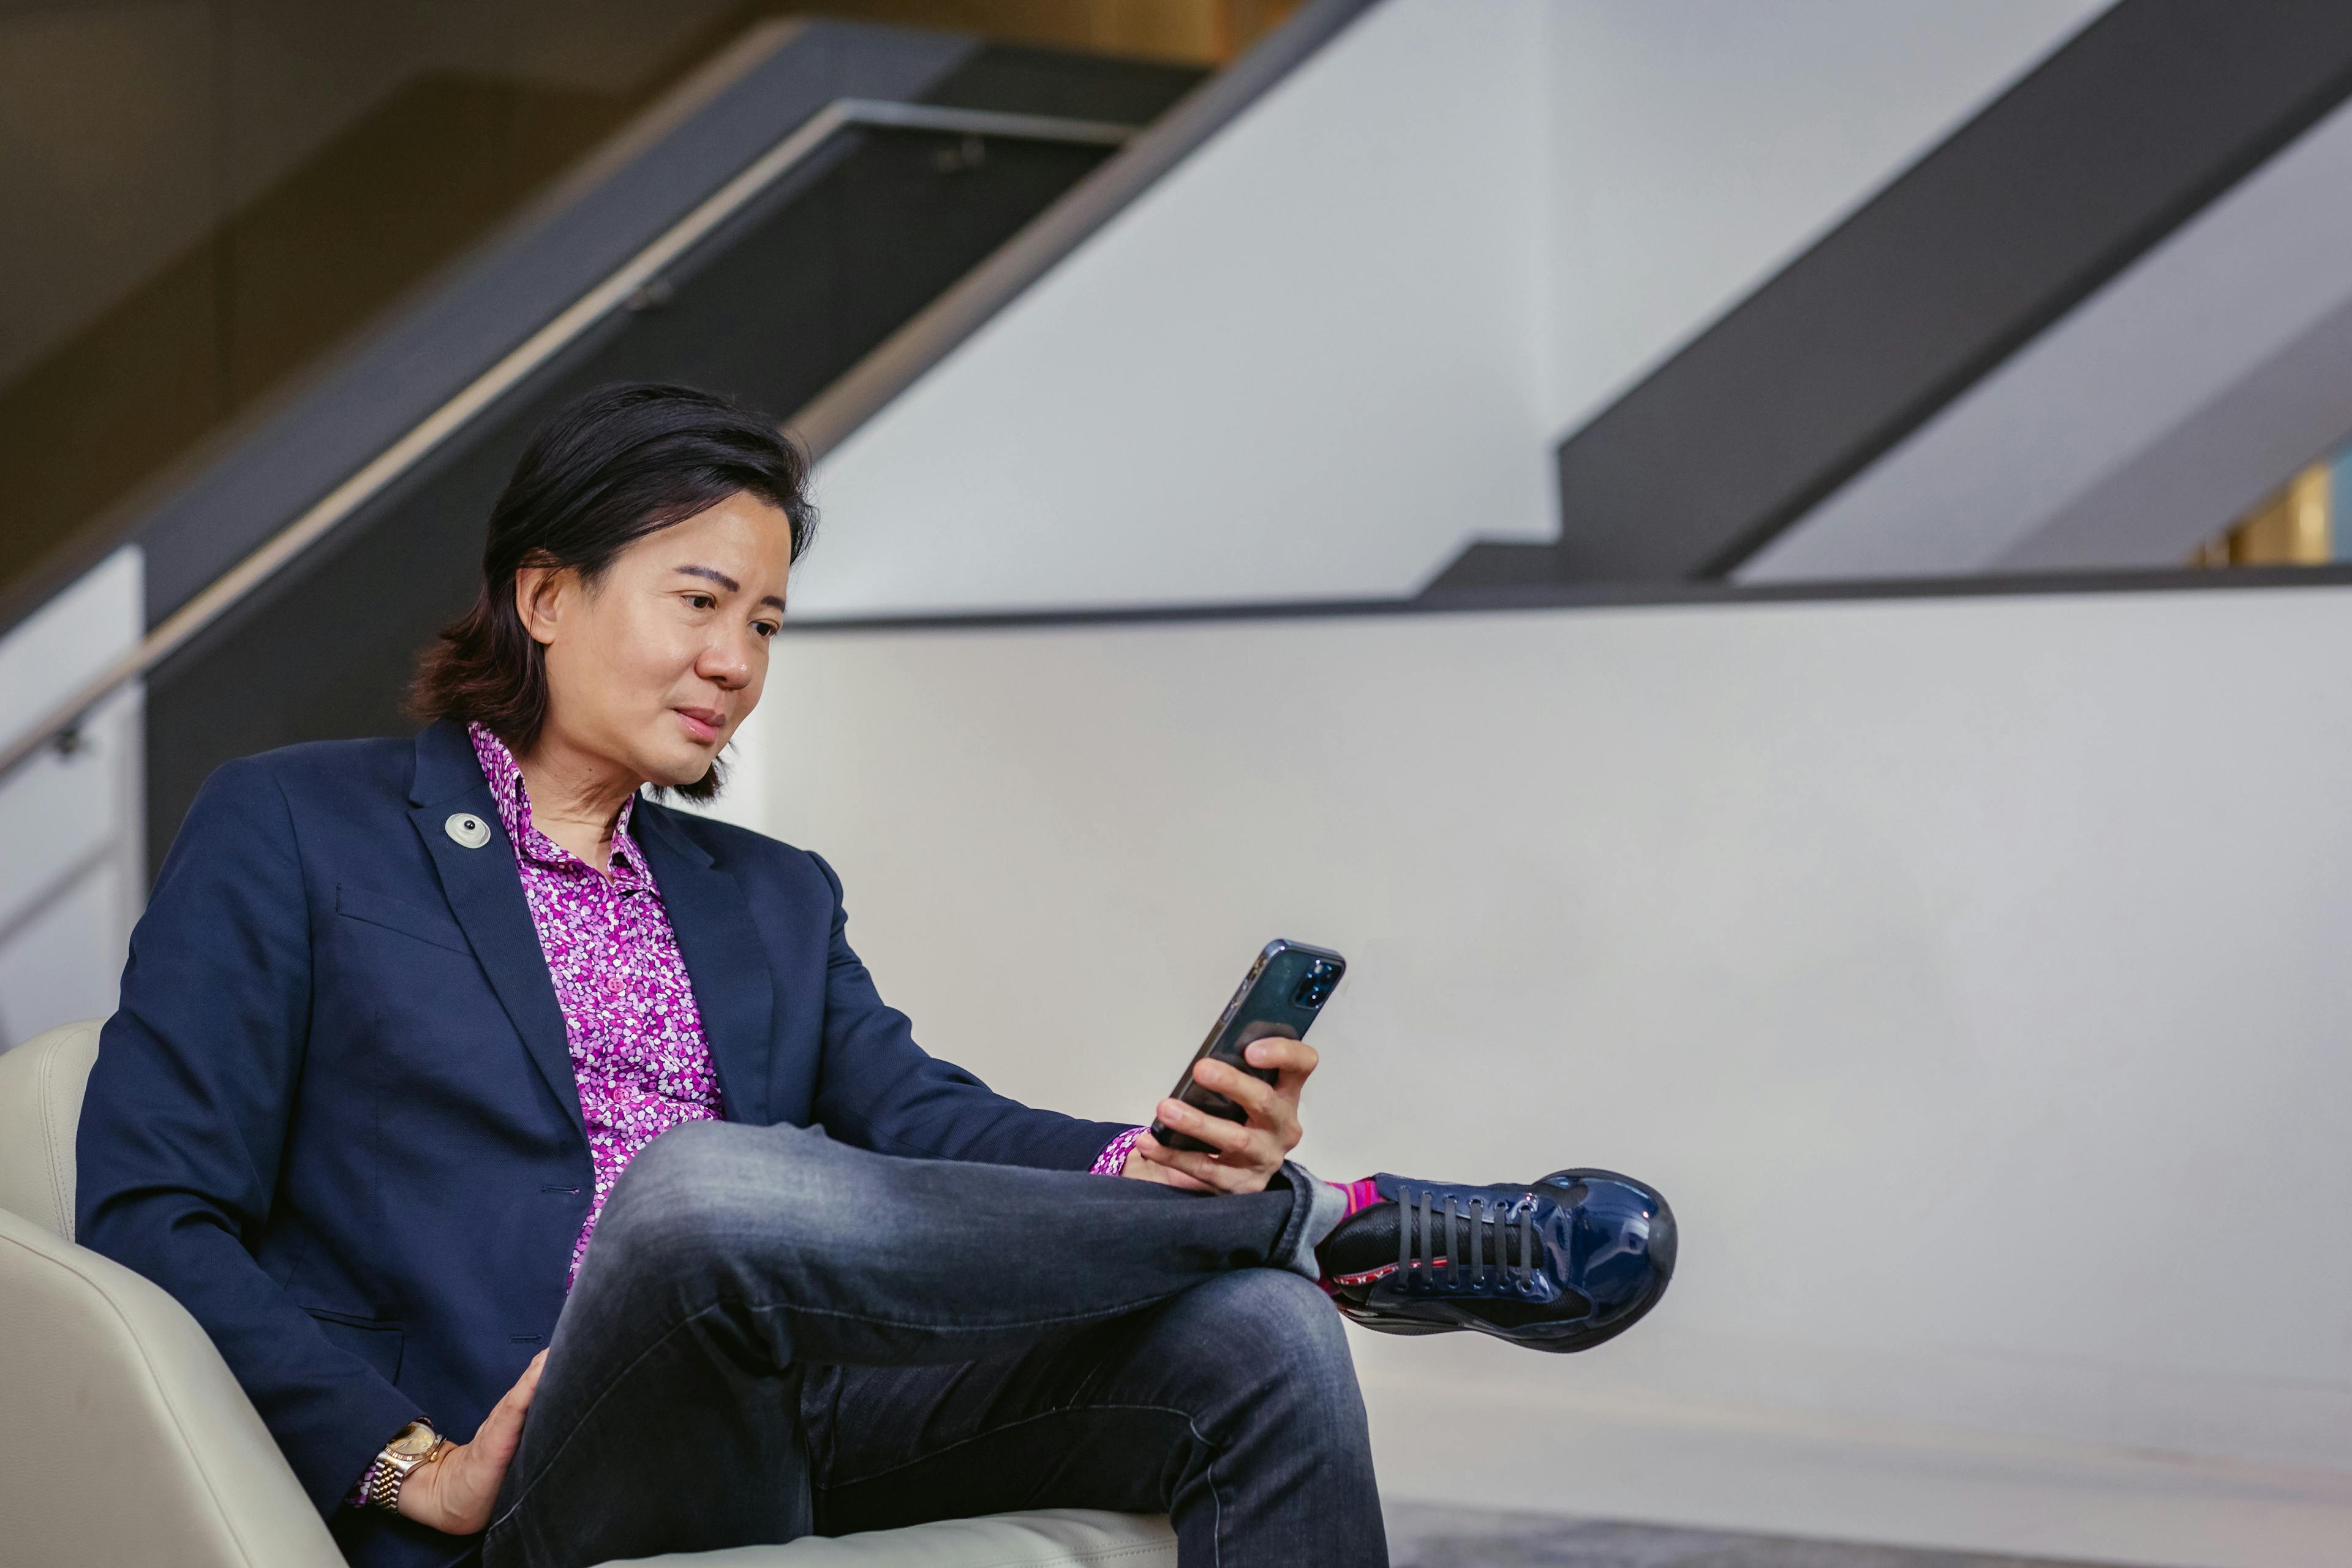 A person in a purple shirt and blue blazer sitting on a couch and looking at their phone.